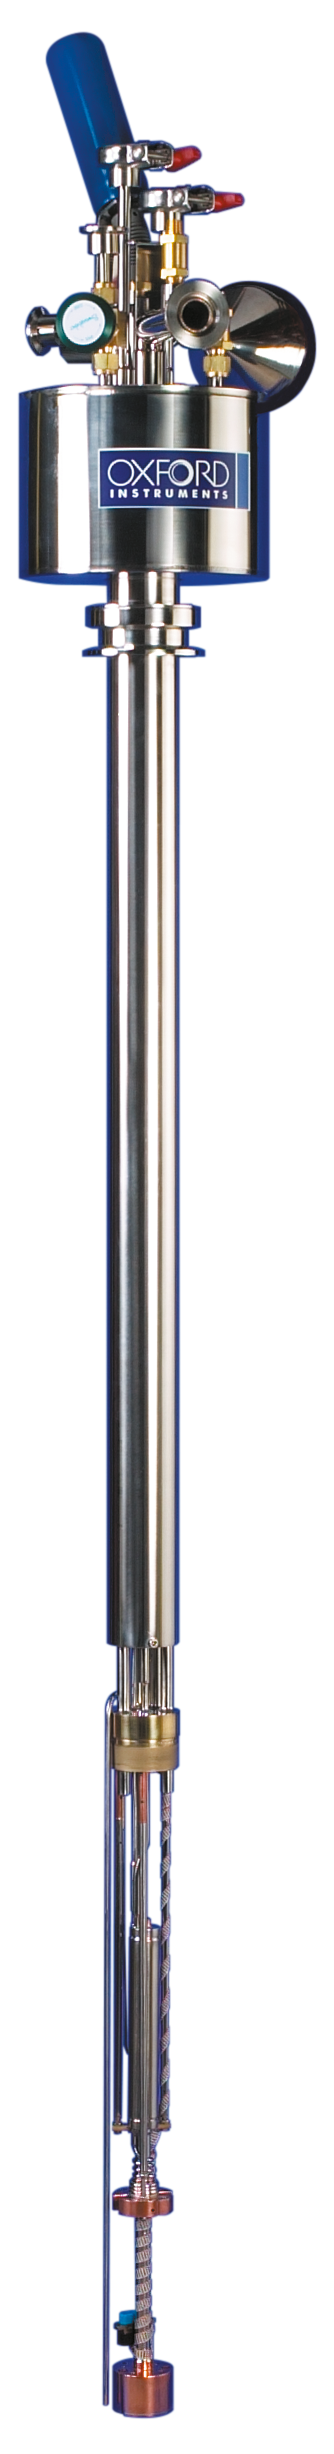 HelioxVL A helium-3 dilution refrigerator with low temperature dipstick insert for low temperature research and cryogenics. 	